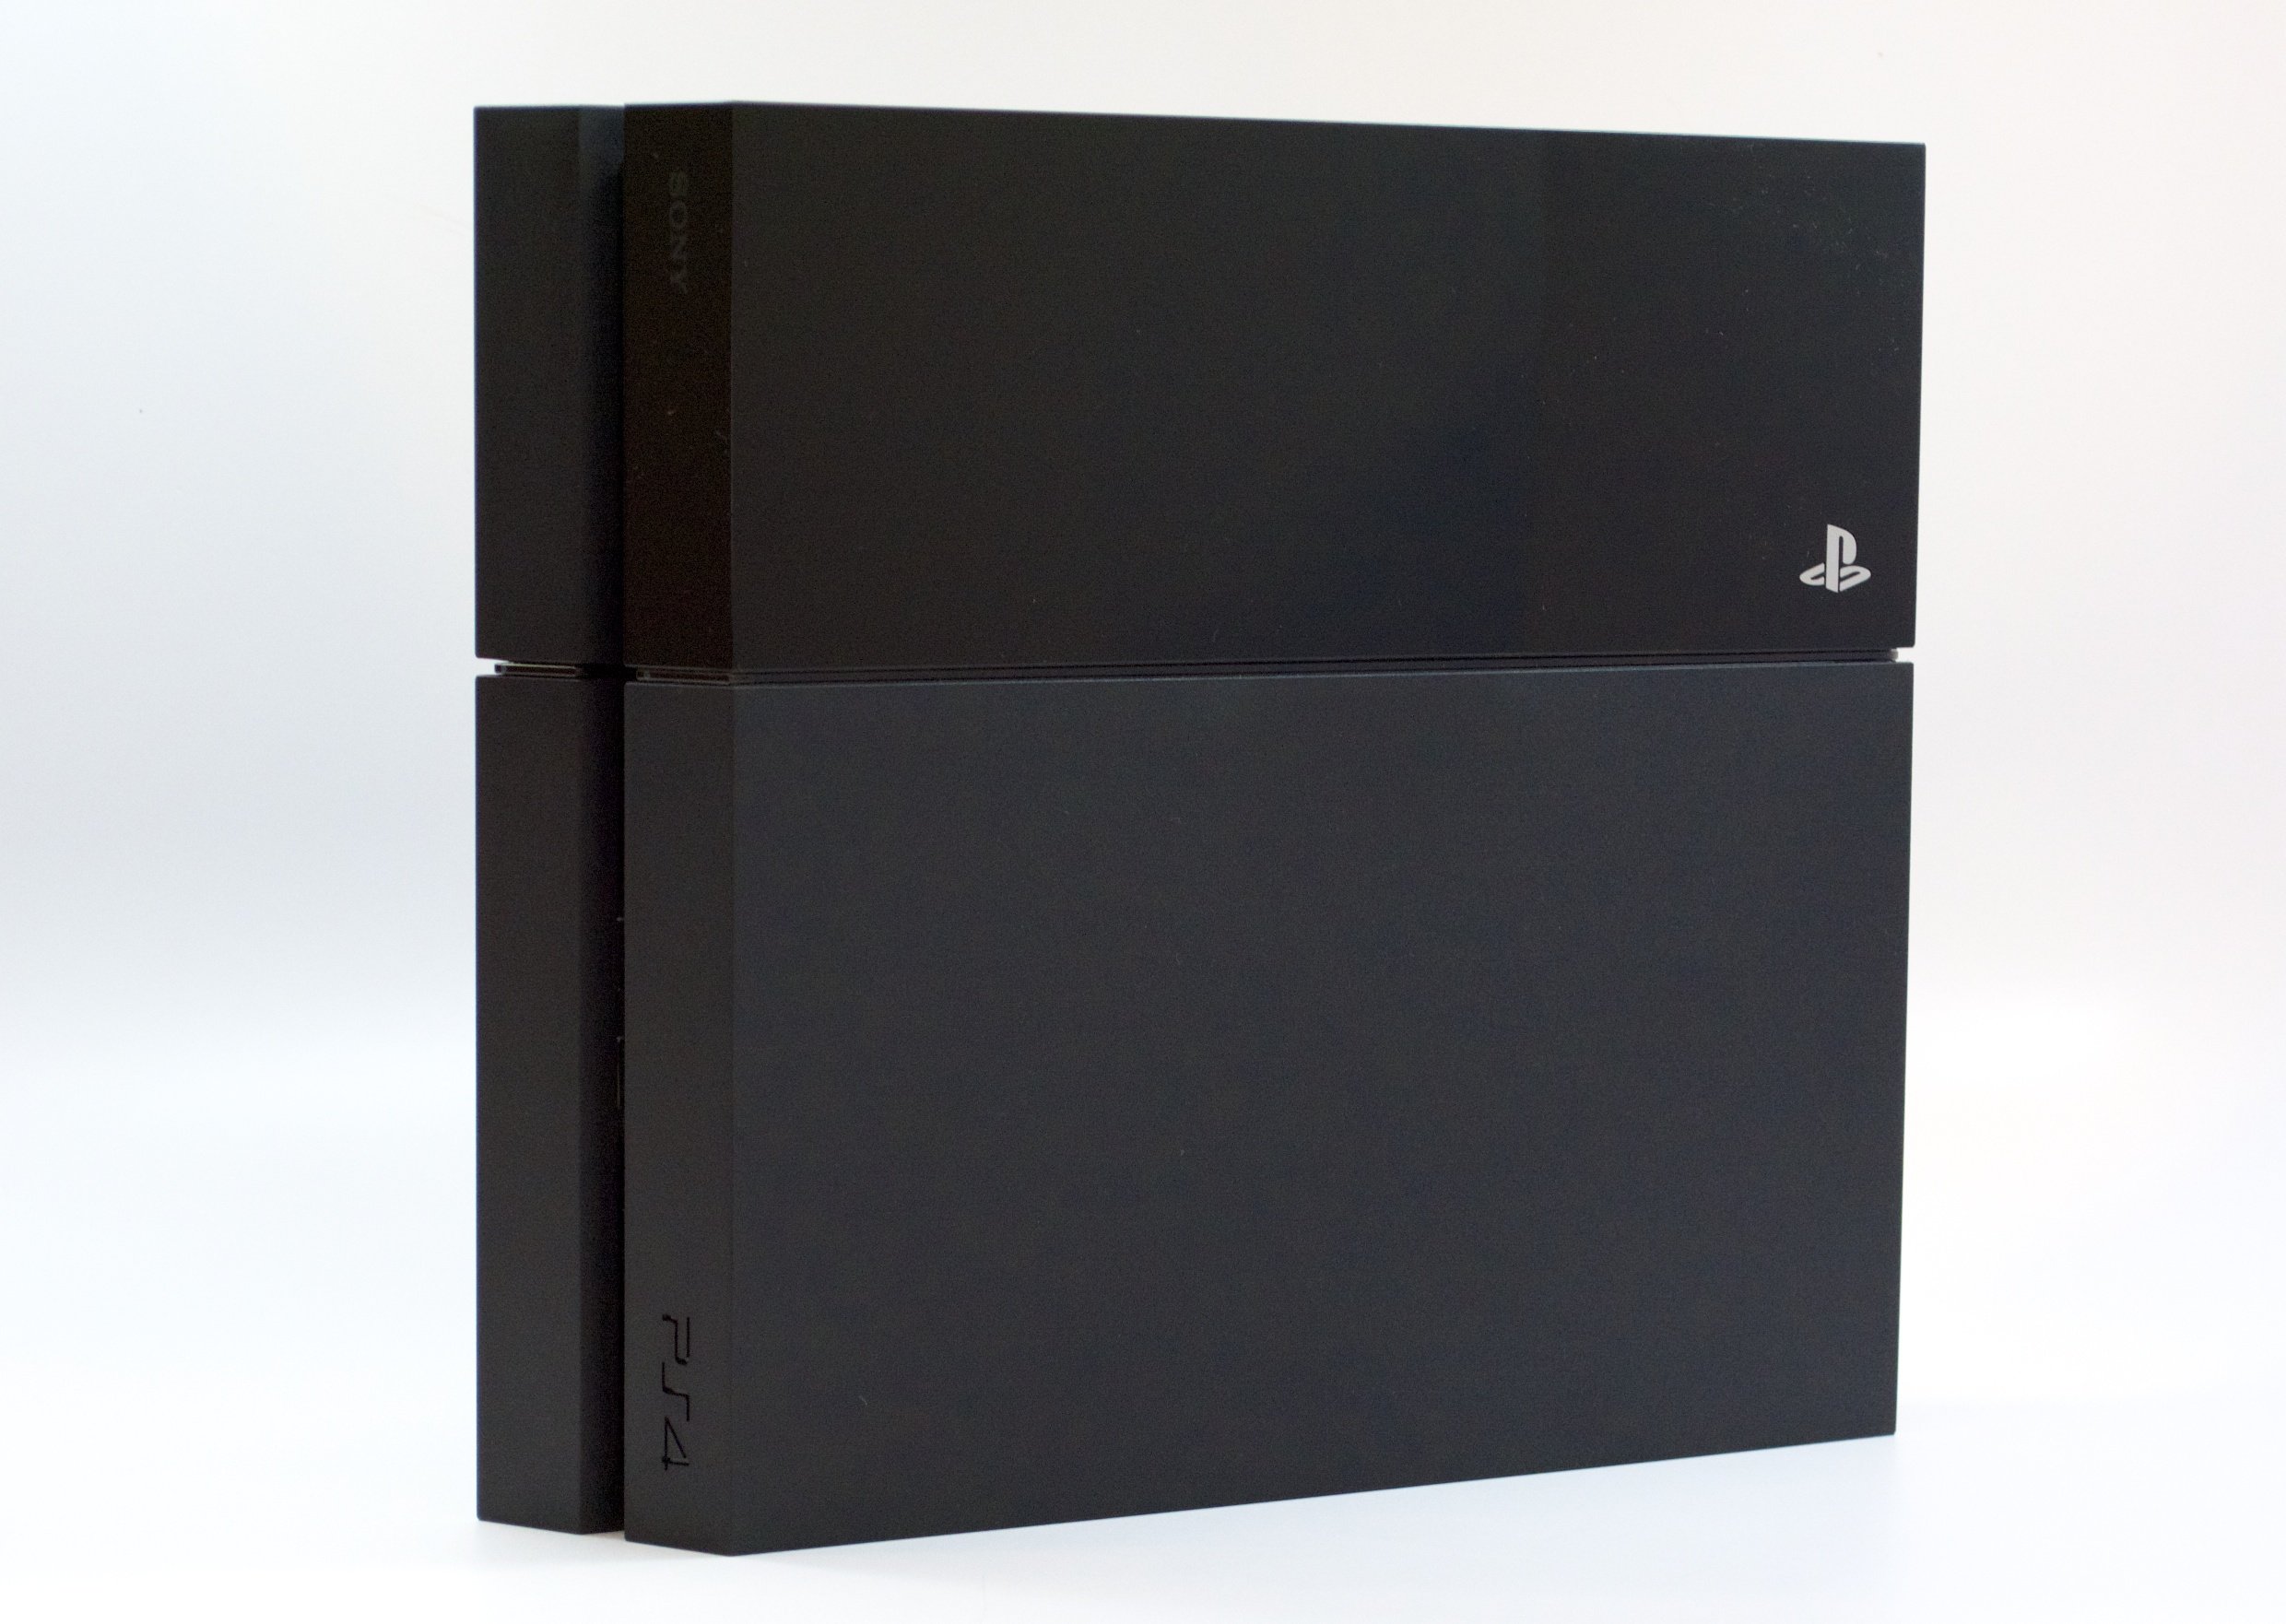 Sony shares a PS4 Error CE-34878-0 fix for corrupted game saves.